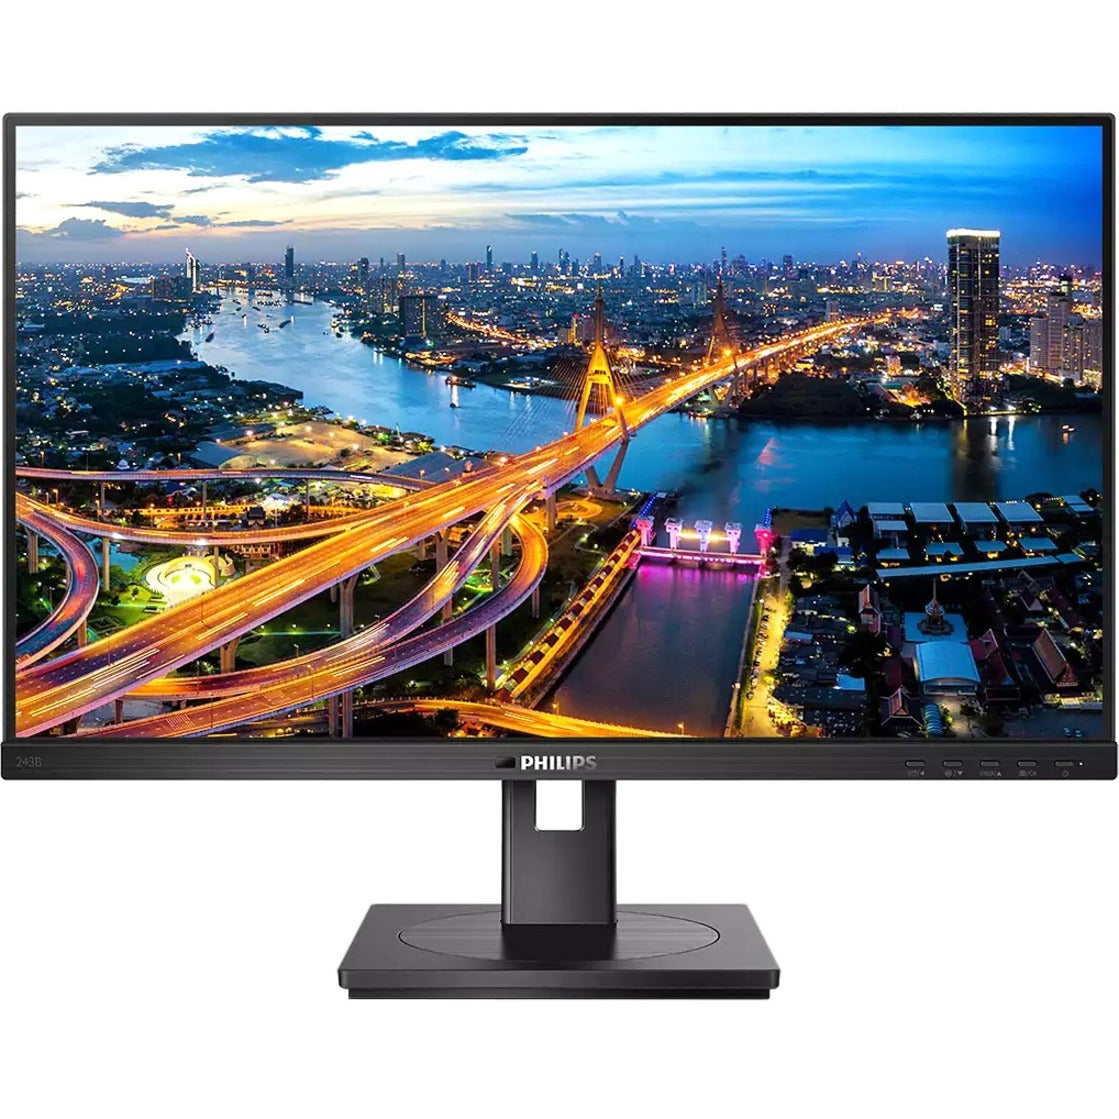 Philips 243B1 LCD Monitor with USB-C, 23.8 Full HD, Textured Black